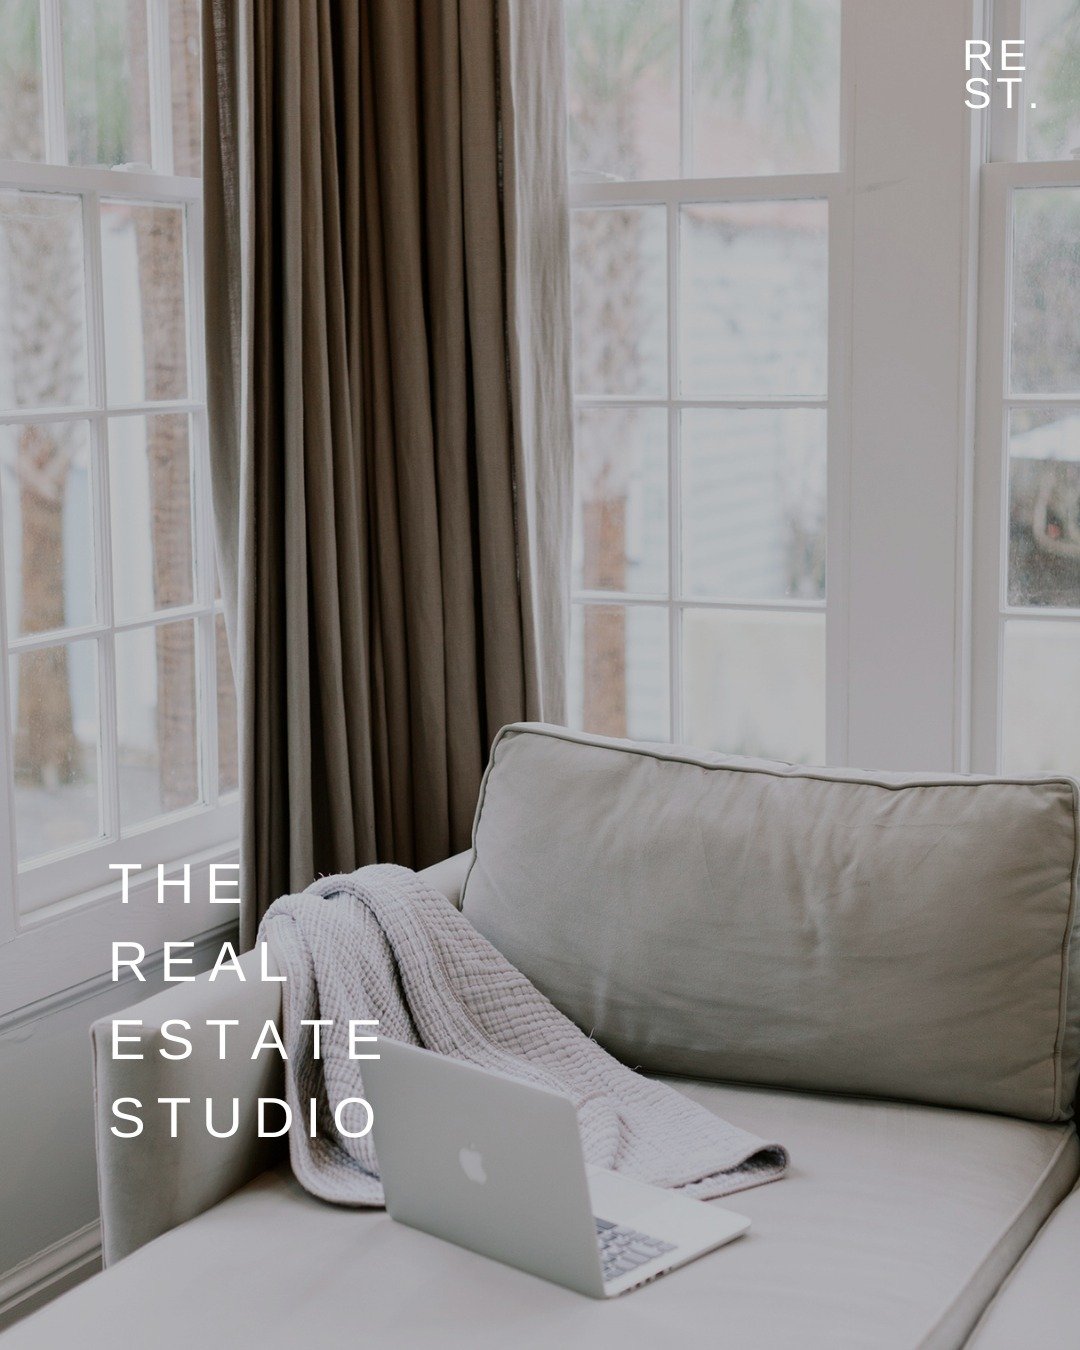 Elevate your real estate business &amp; stand out from the competition, with professionally-designed websites &amp; branding assets created specifically for YOU - the modern real estate agent.⁠
⁠
What you'll find at The Real Estate Studio -⁠
⁠
WEBSIT